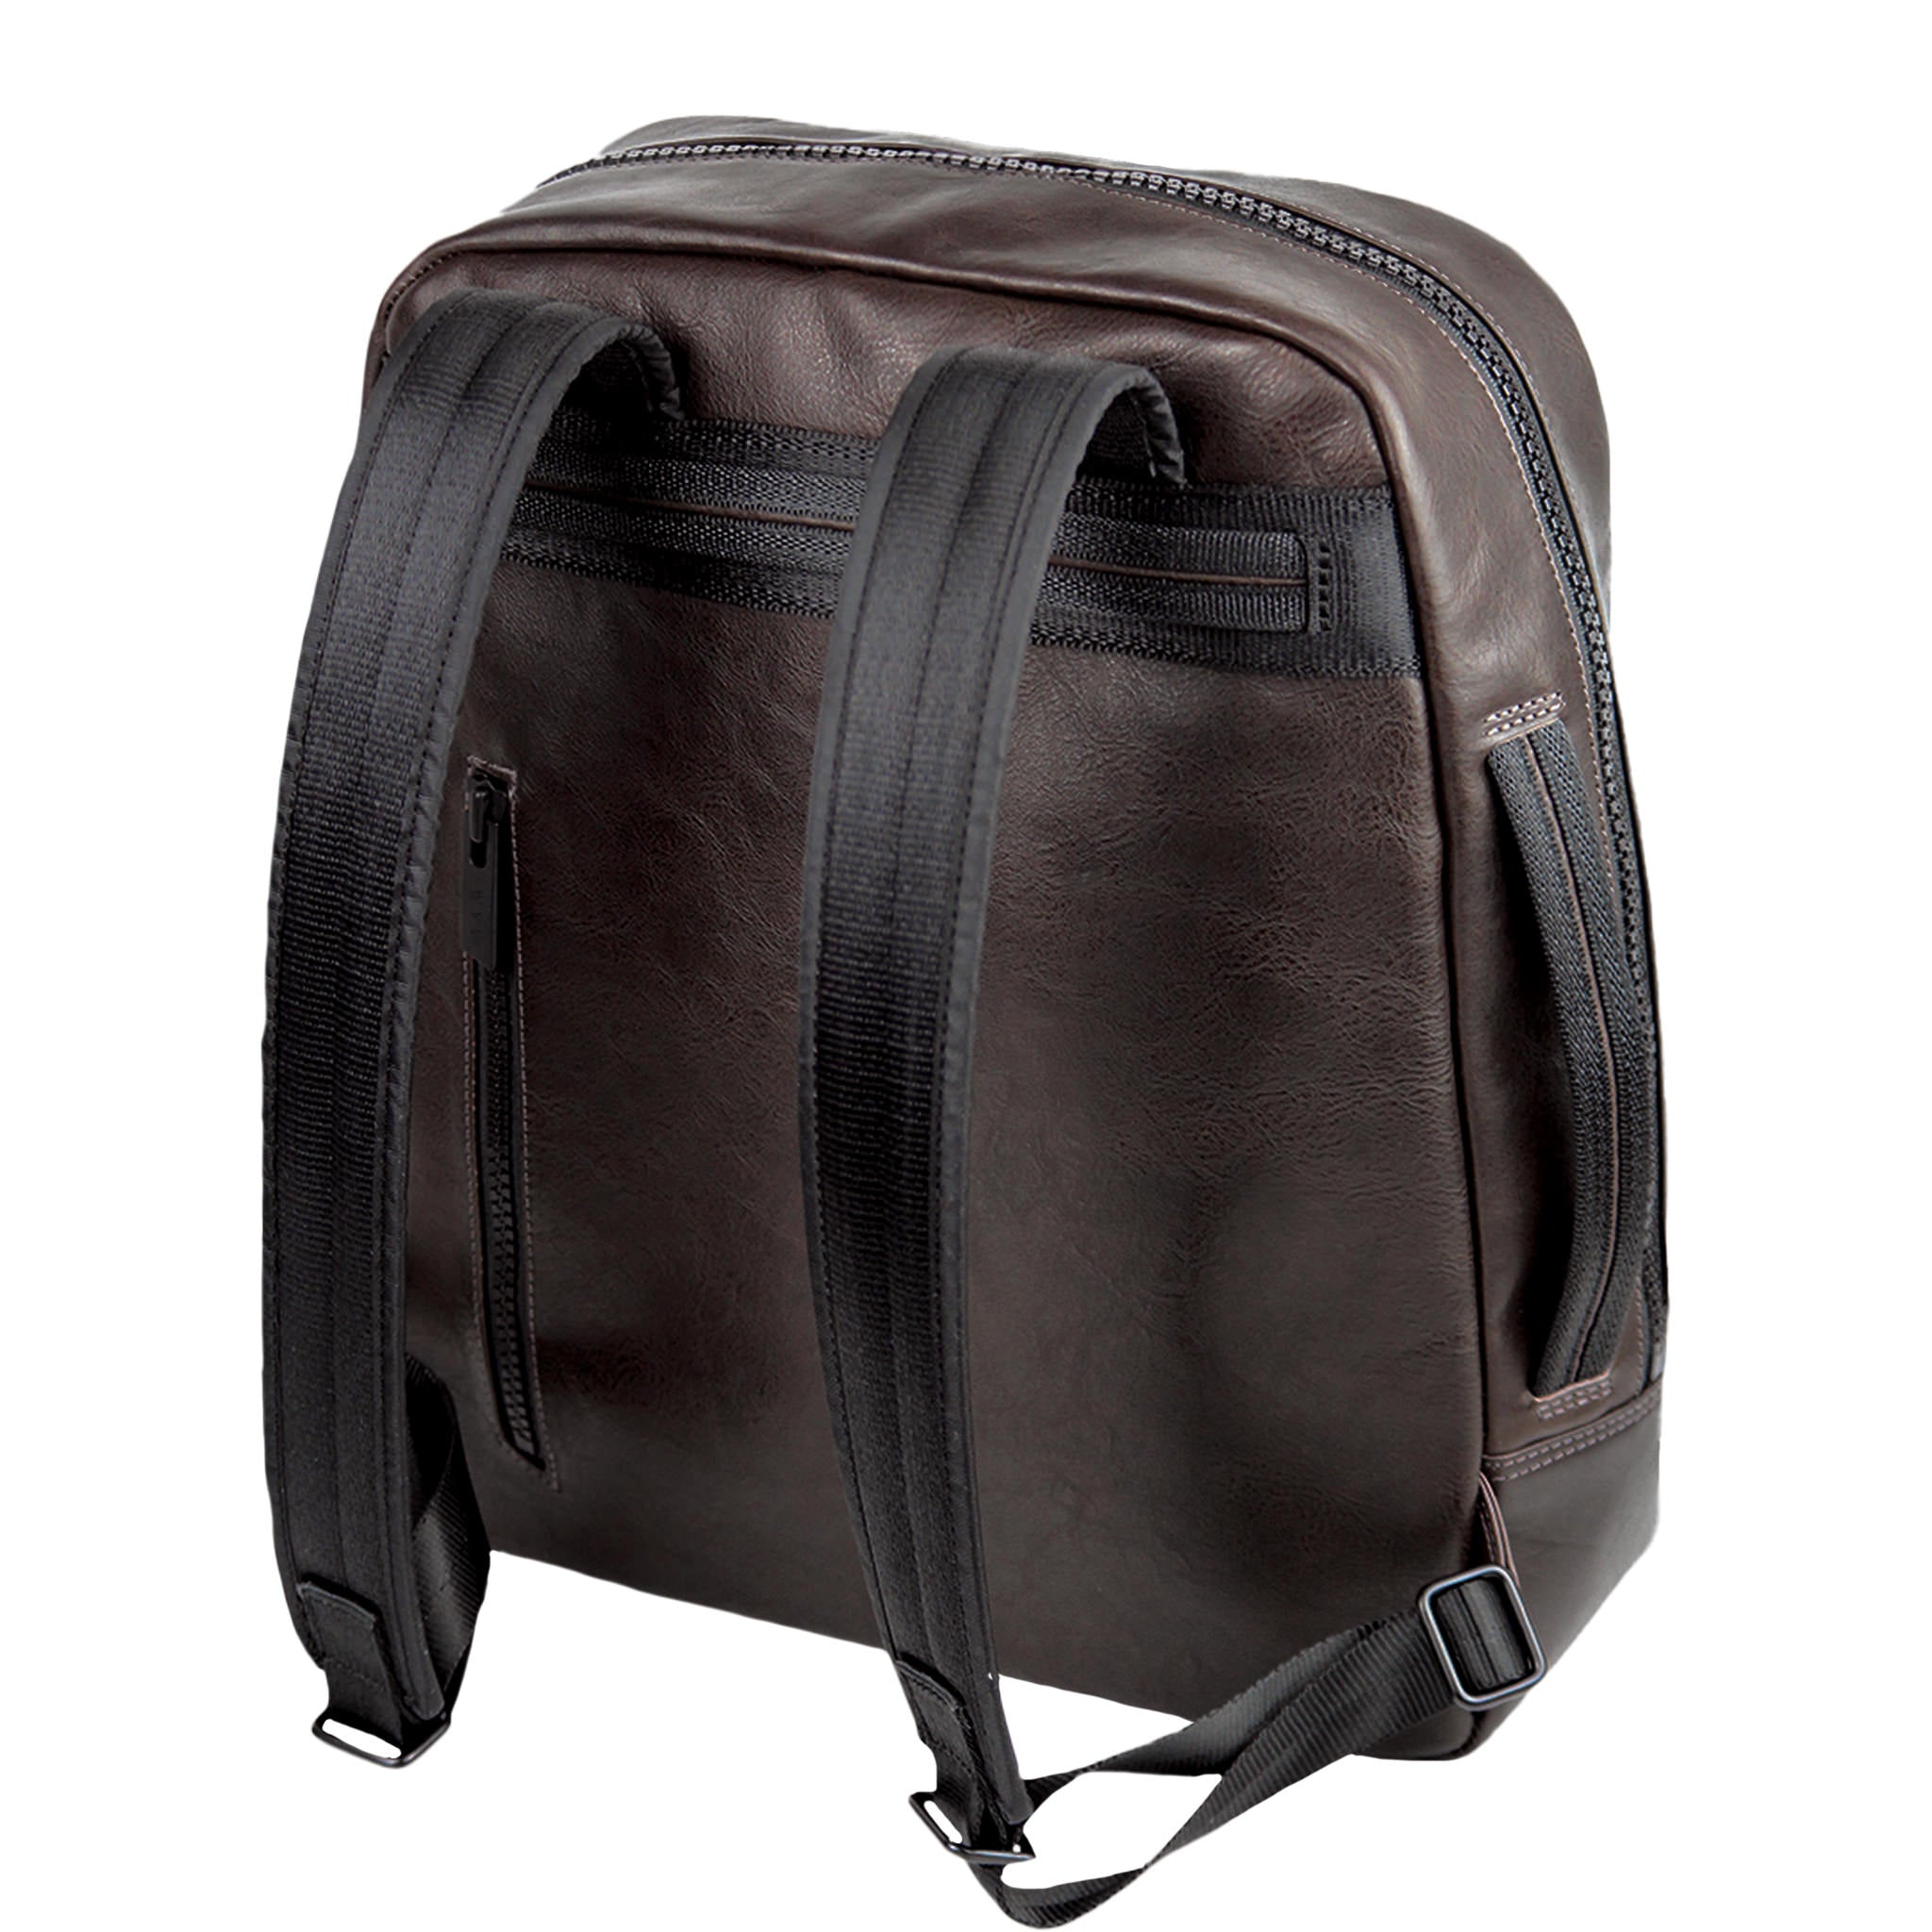 backview of a brown leather backpack, with a vertical zip compartment on the back